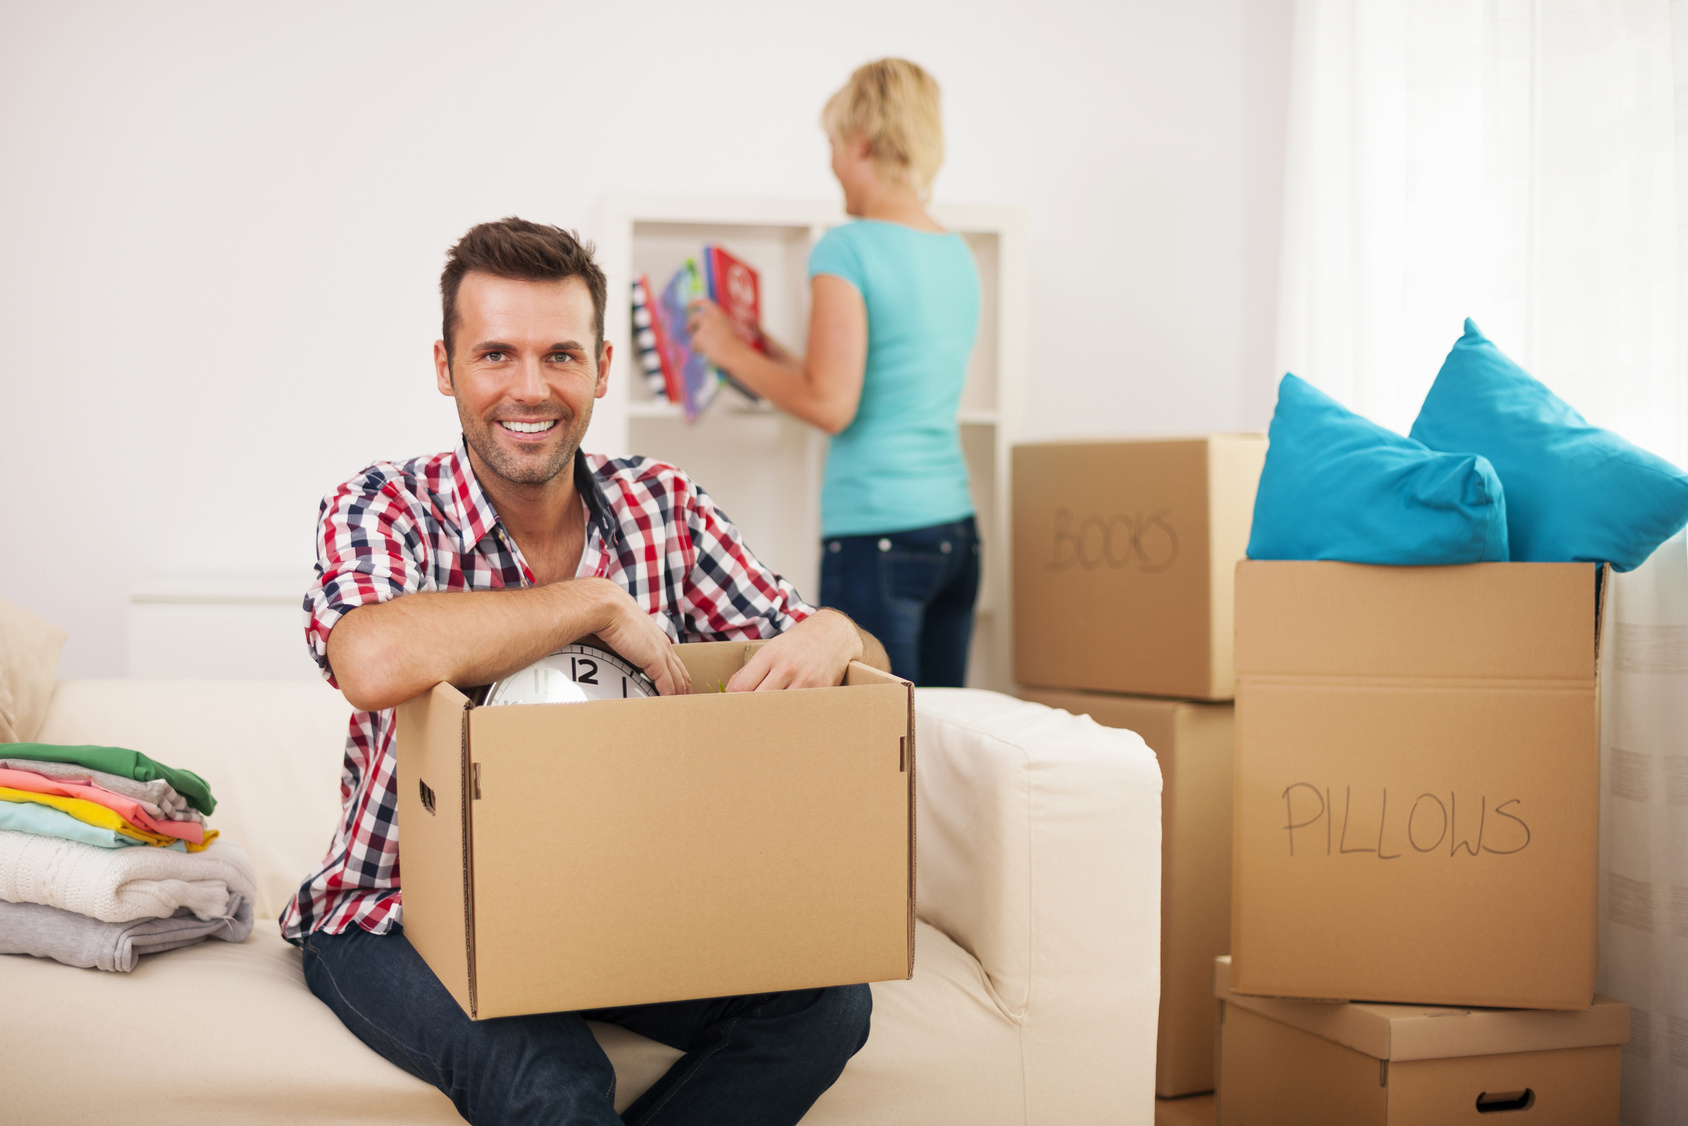  Tips on Hiring Removalists With in Your Budget